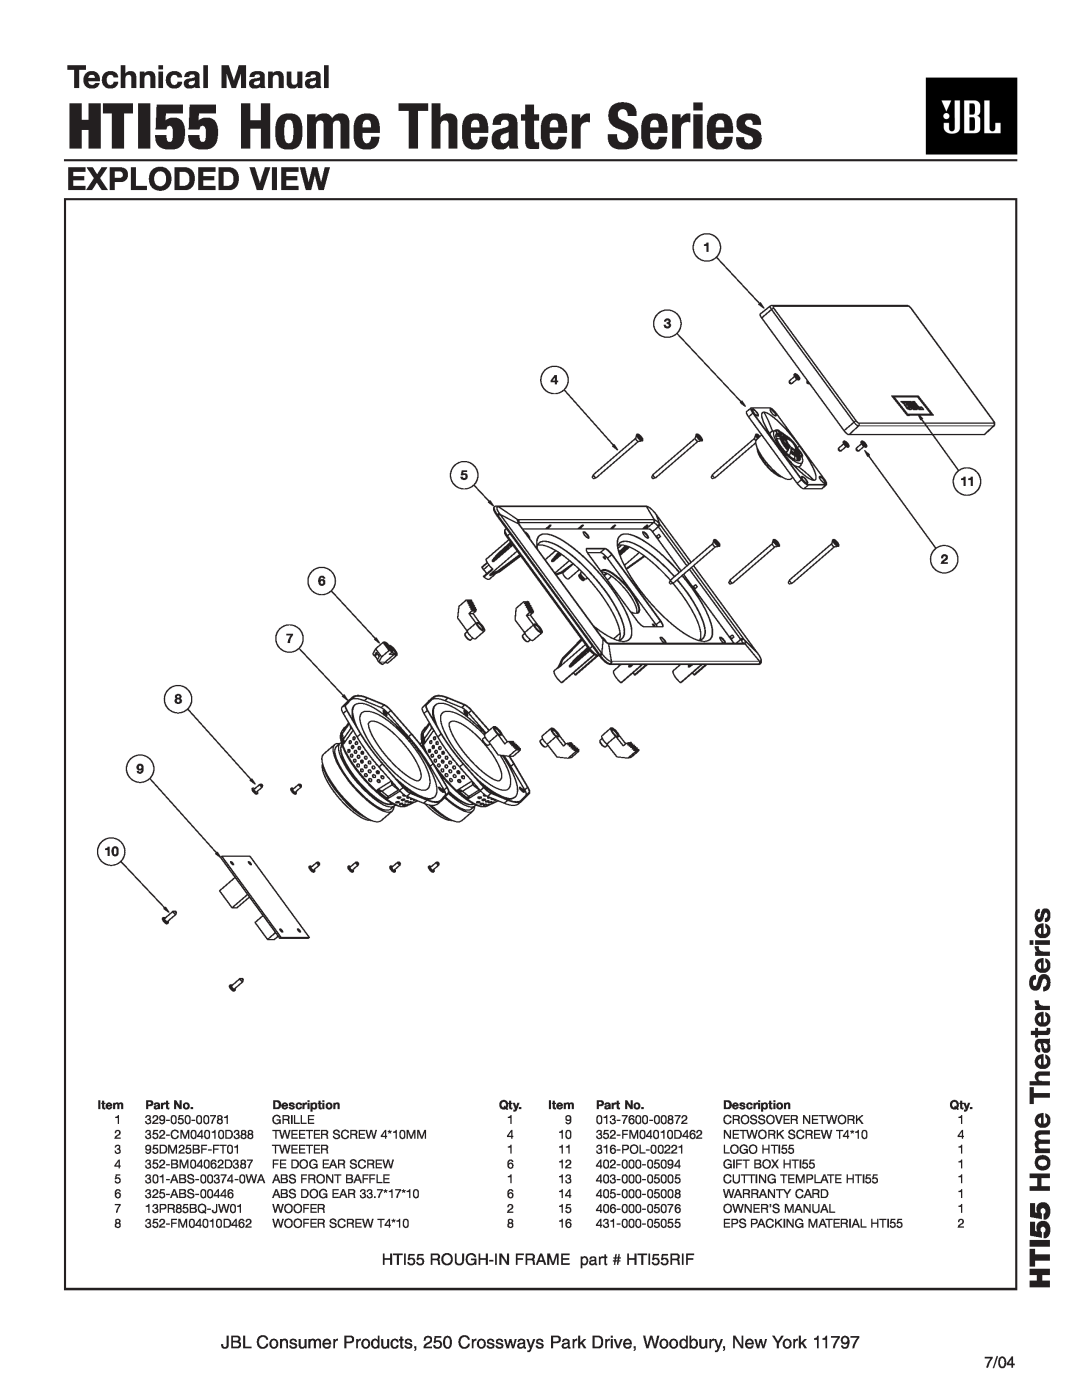 JBL MRK-300ST-BK technical manual Exploded View, HTI55 Home Theater Series, Technical Manual 